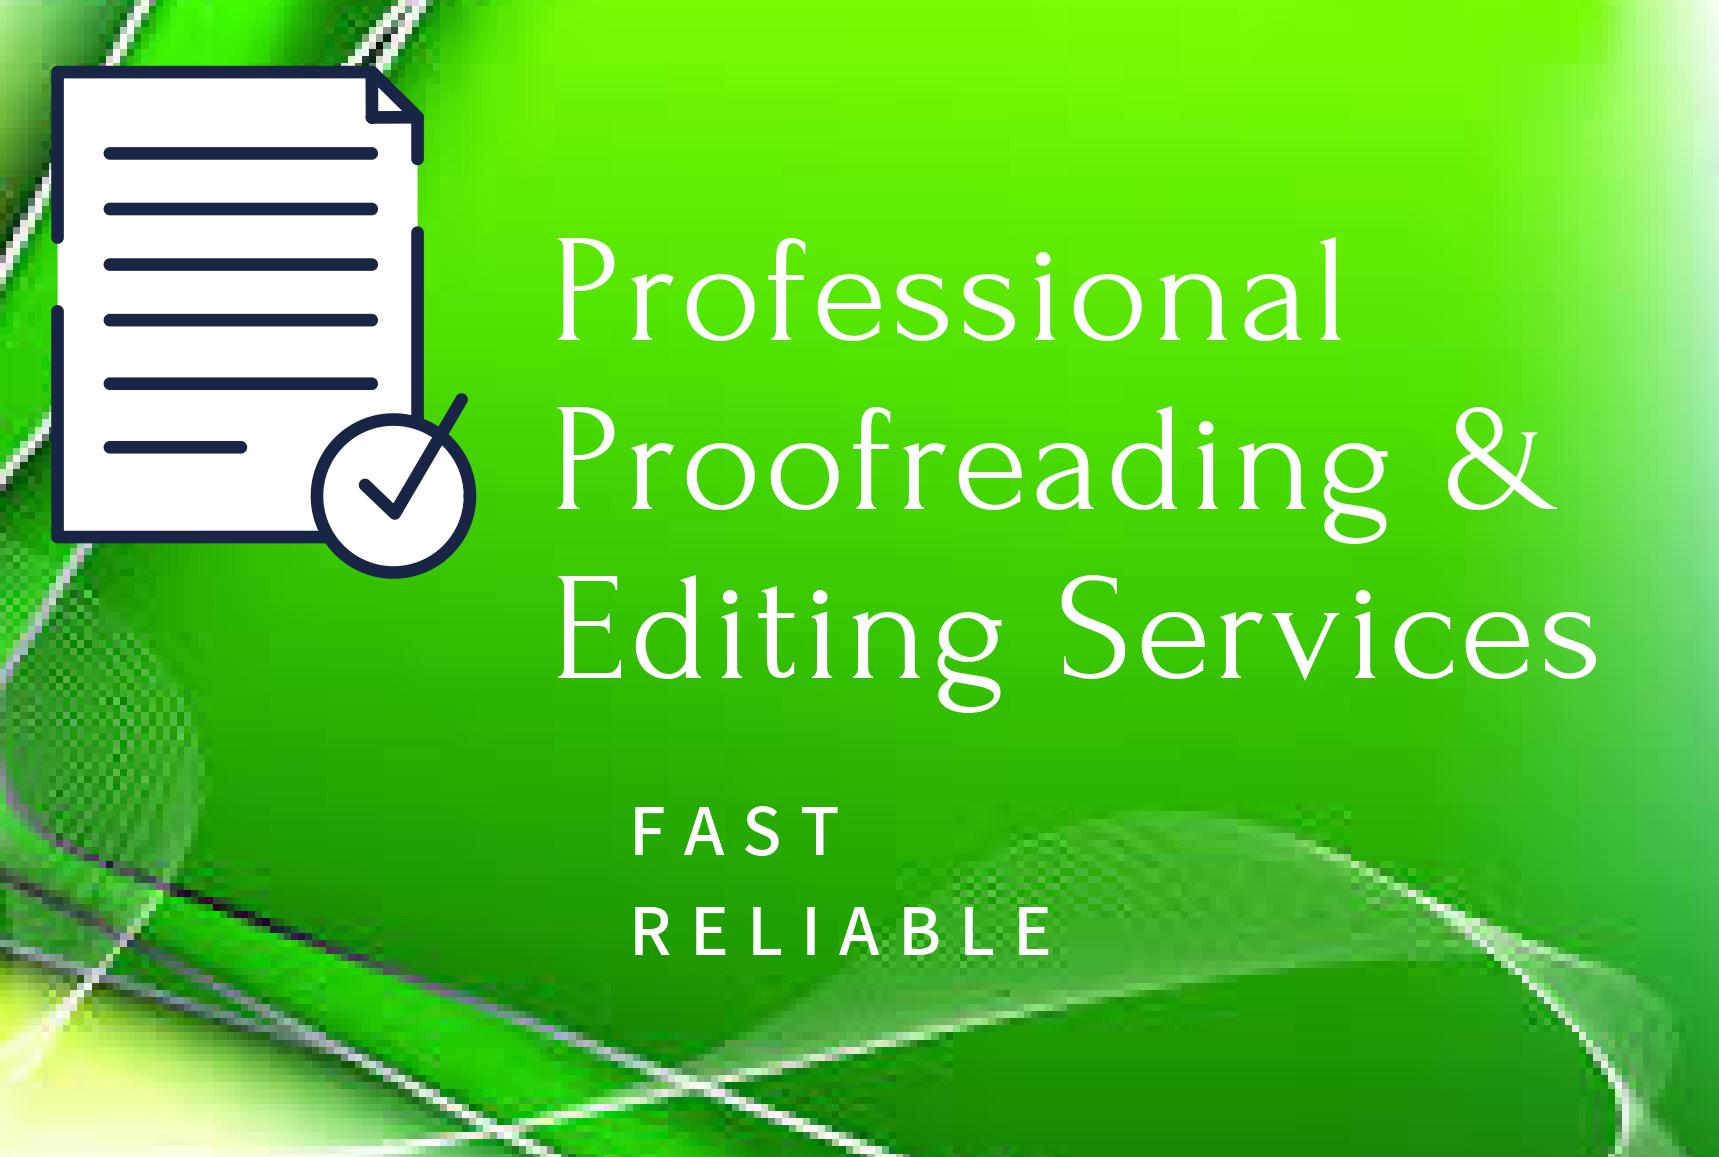 I will be your professional proofreader and editor, FiverrBox